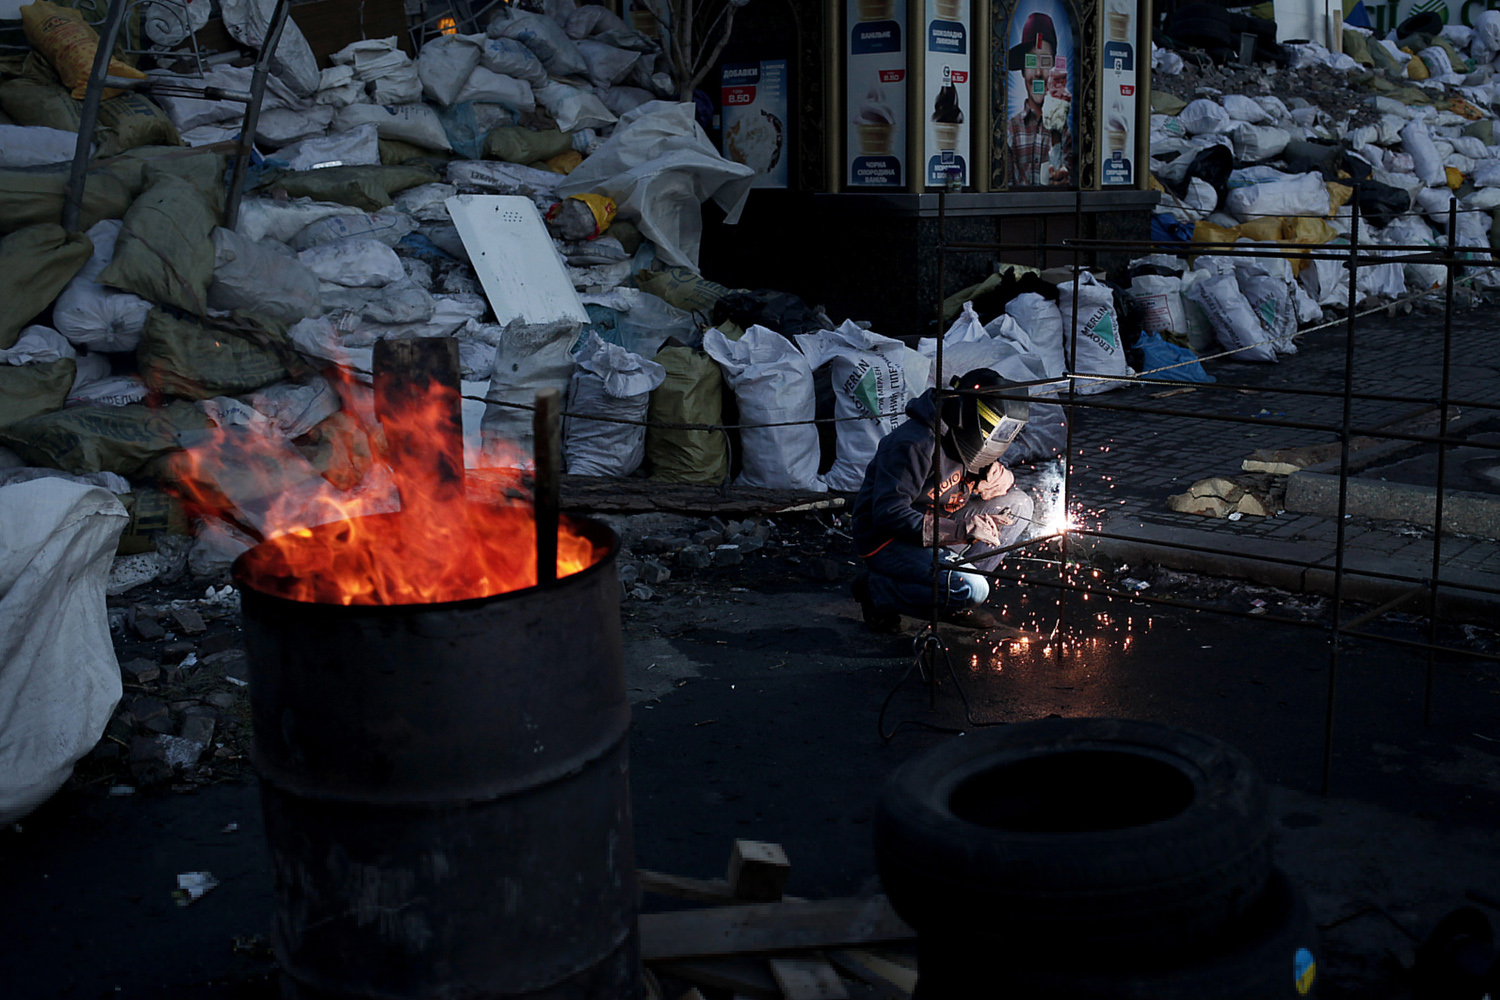 Feb. 5, 2014. An anti-government protester welds steel structures at a barricade in Independence Square.